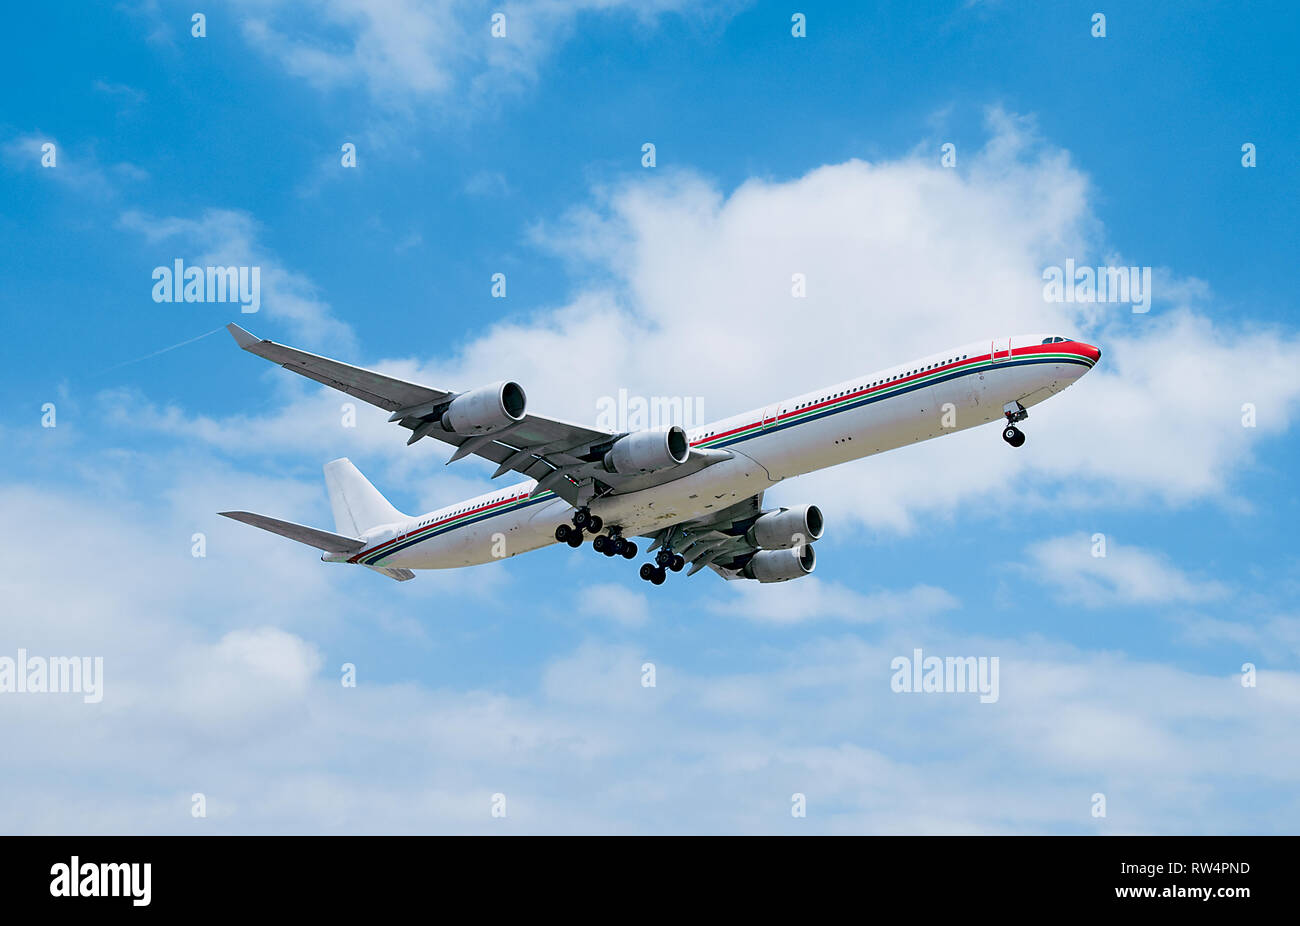 Unlettered Airbus A340 Jet Airplane Stock Photo